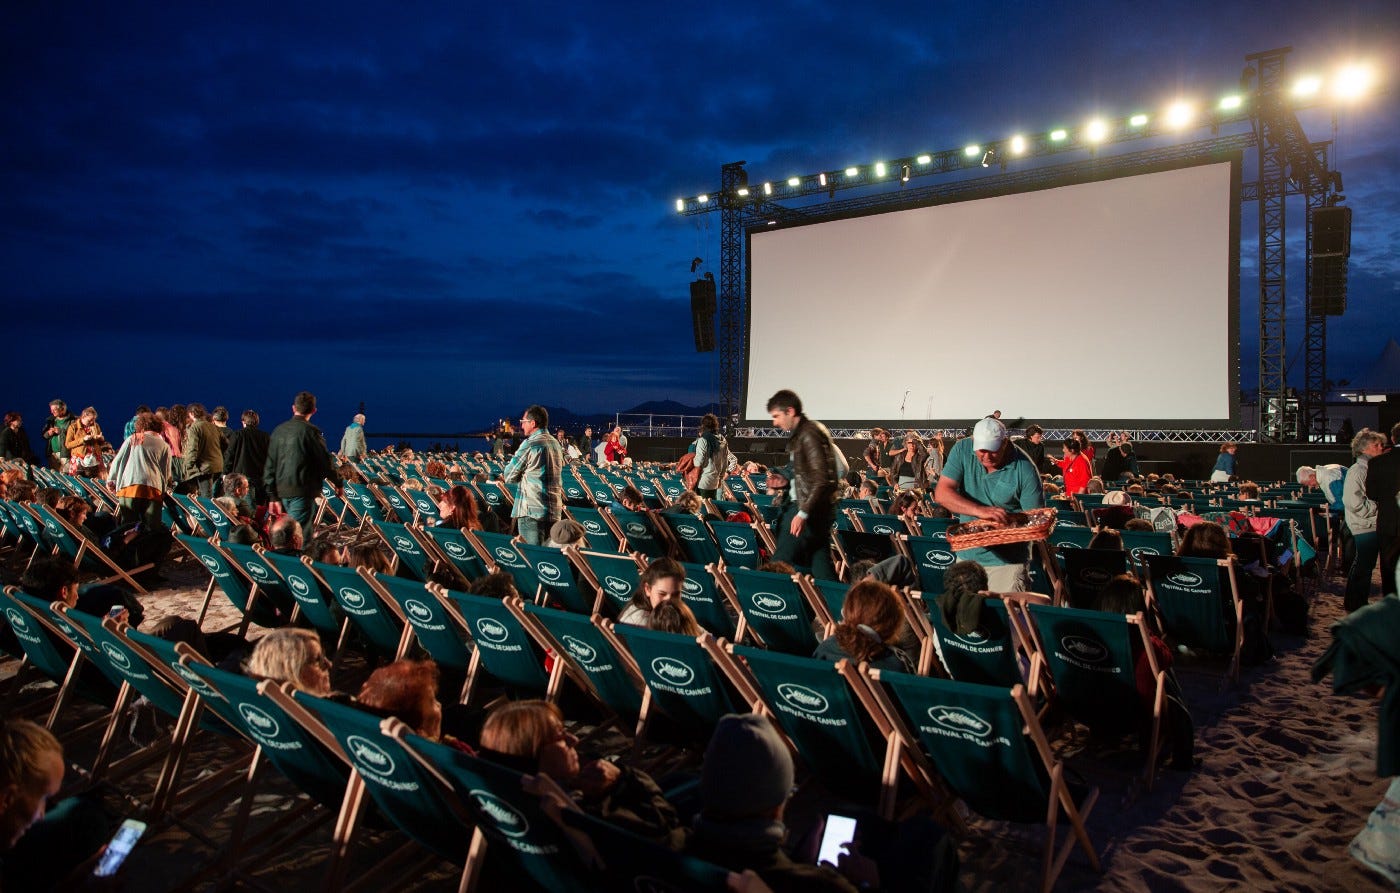 People sitting in seats in front of a large projector outdoors. The lights are on and some people are preparing stuff (moving around, buying food), while others have settled into their chairs and are awaiting the movie.